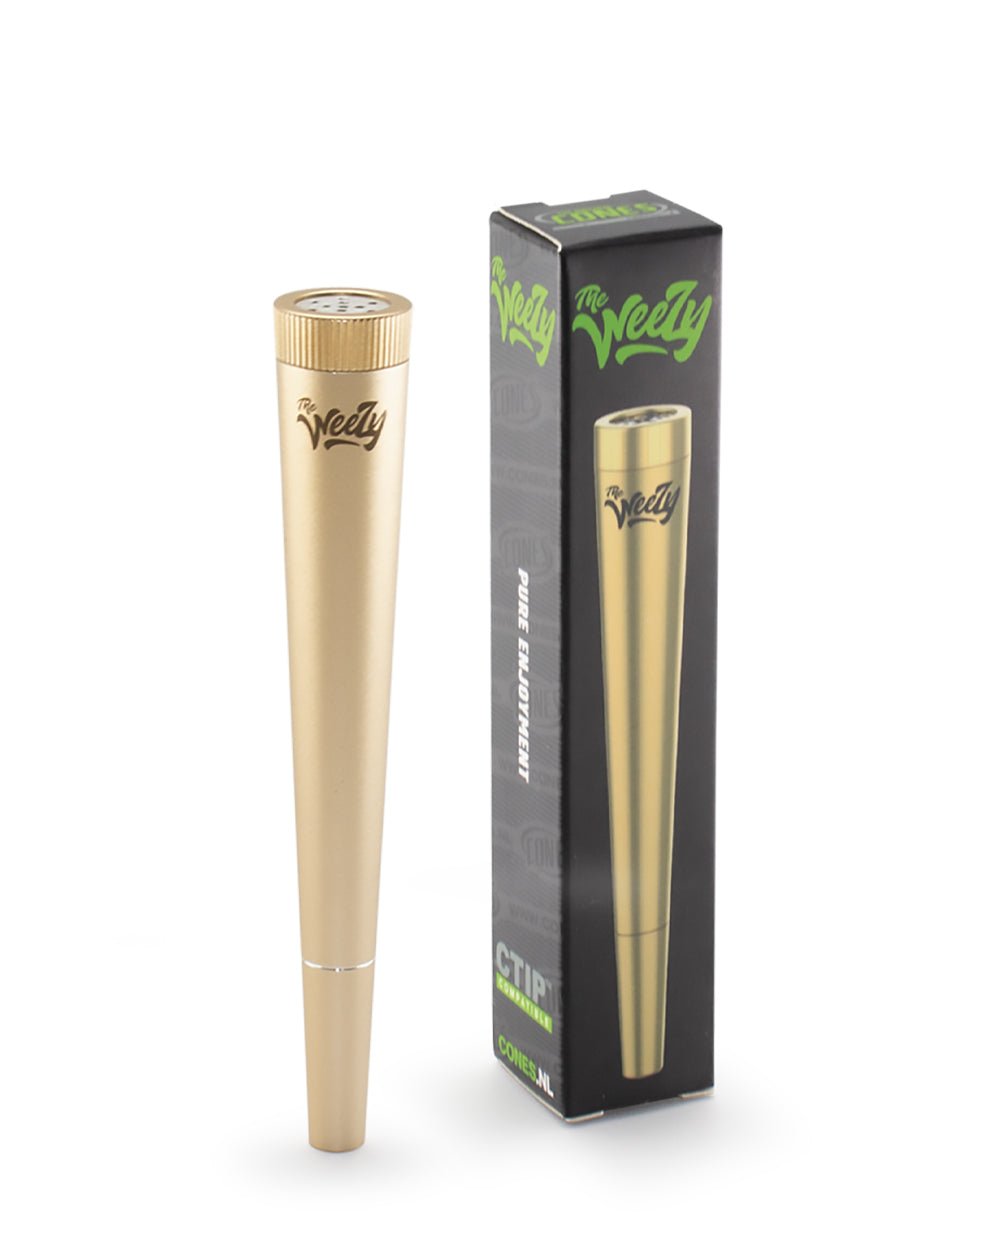 Gold Sky Glass Hand Pipe, $19.99 + FREE SHIPPING